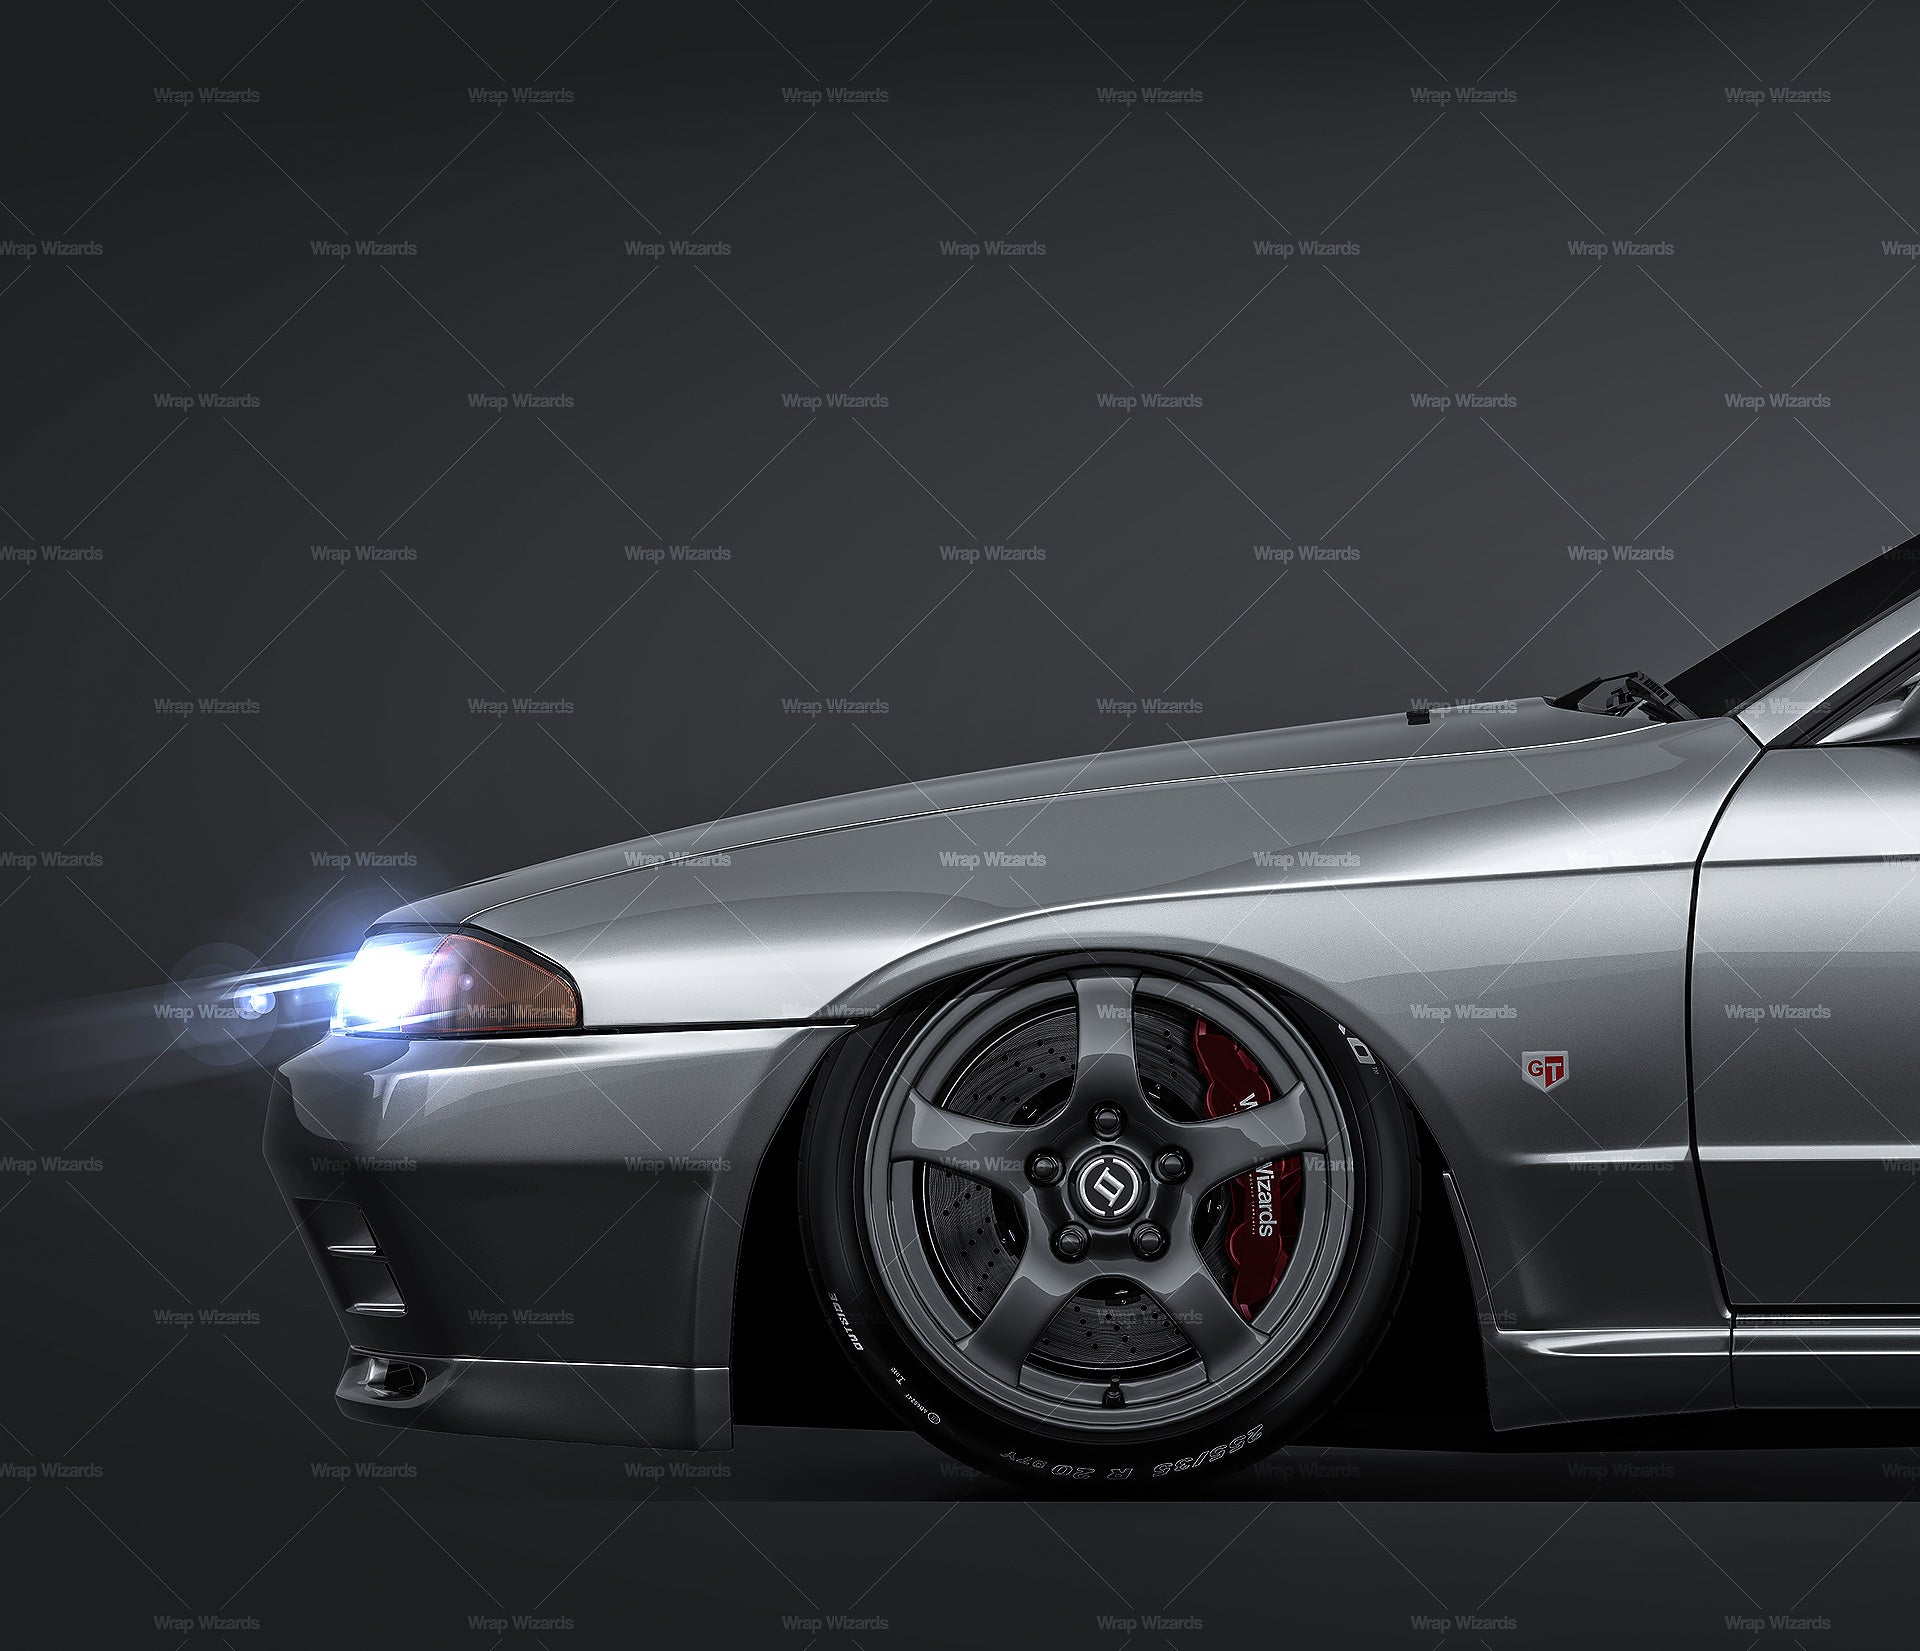 Nissan Skyline R32 GT-R coupe 1989 glossy finish - all sides Car Mockup Template.psd